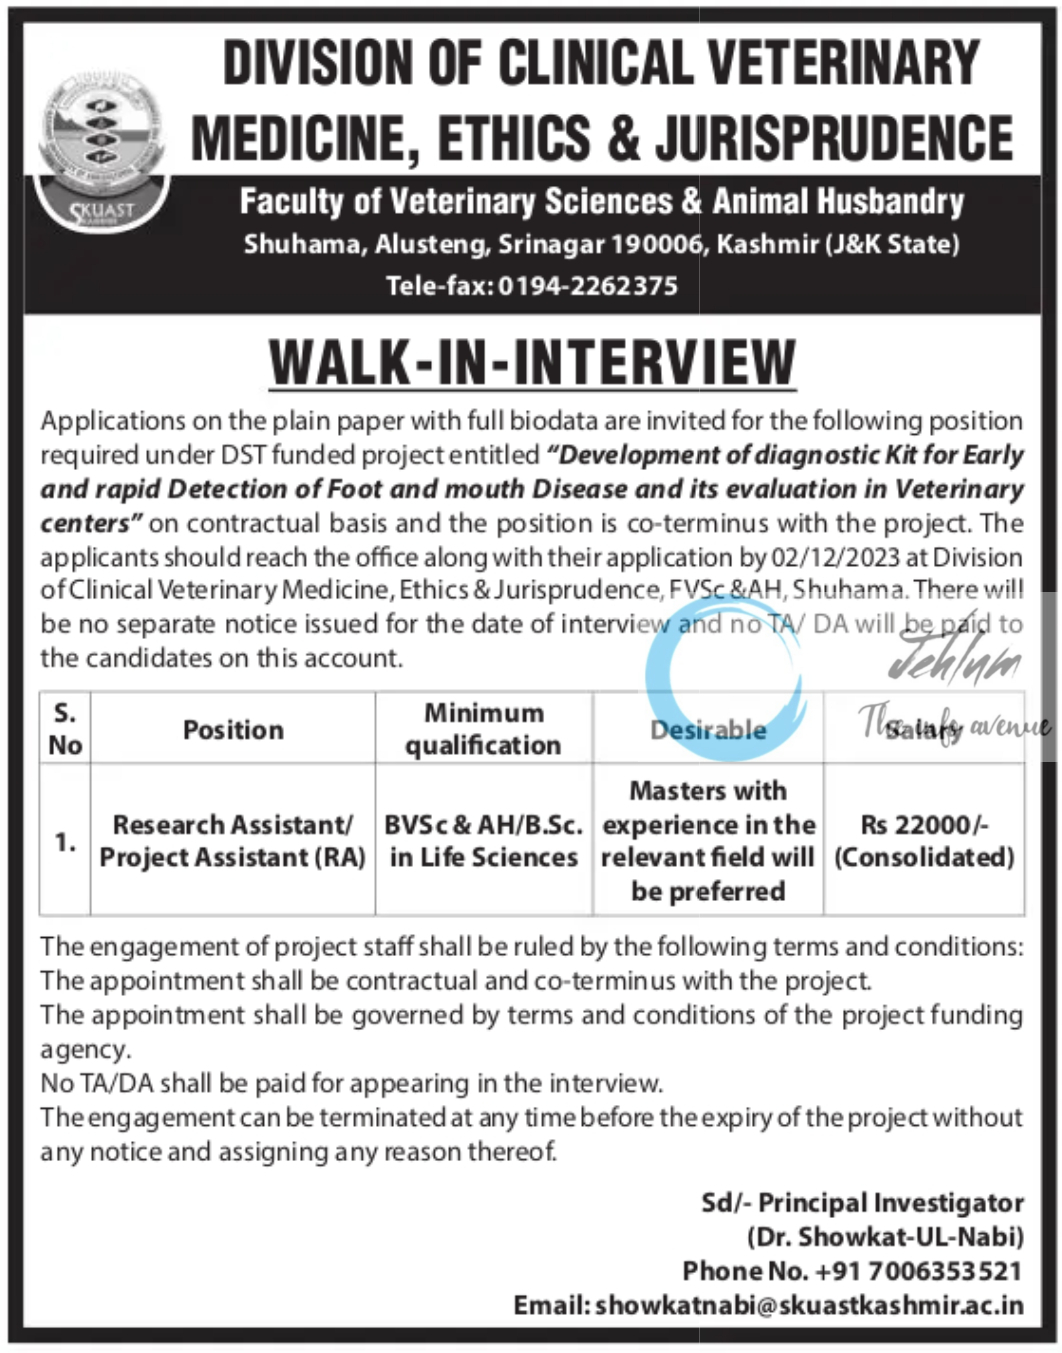 SKUAST KASHMIR DIVISION OF CLINICAL VETERINARY MEDICINE ETHICS AND JURISPRUDENCE WALK-IN-INTERVIEW 2023